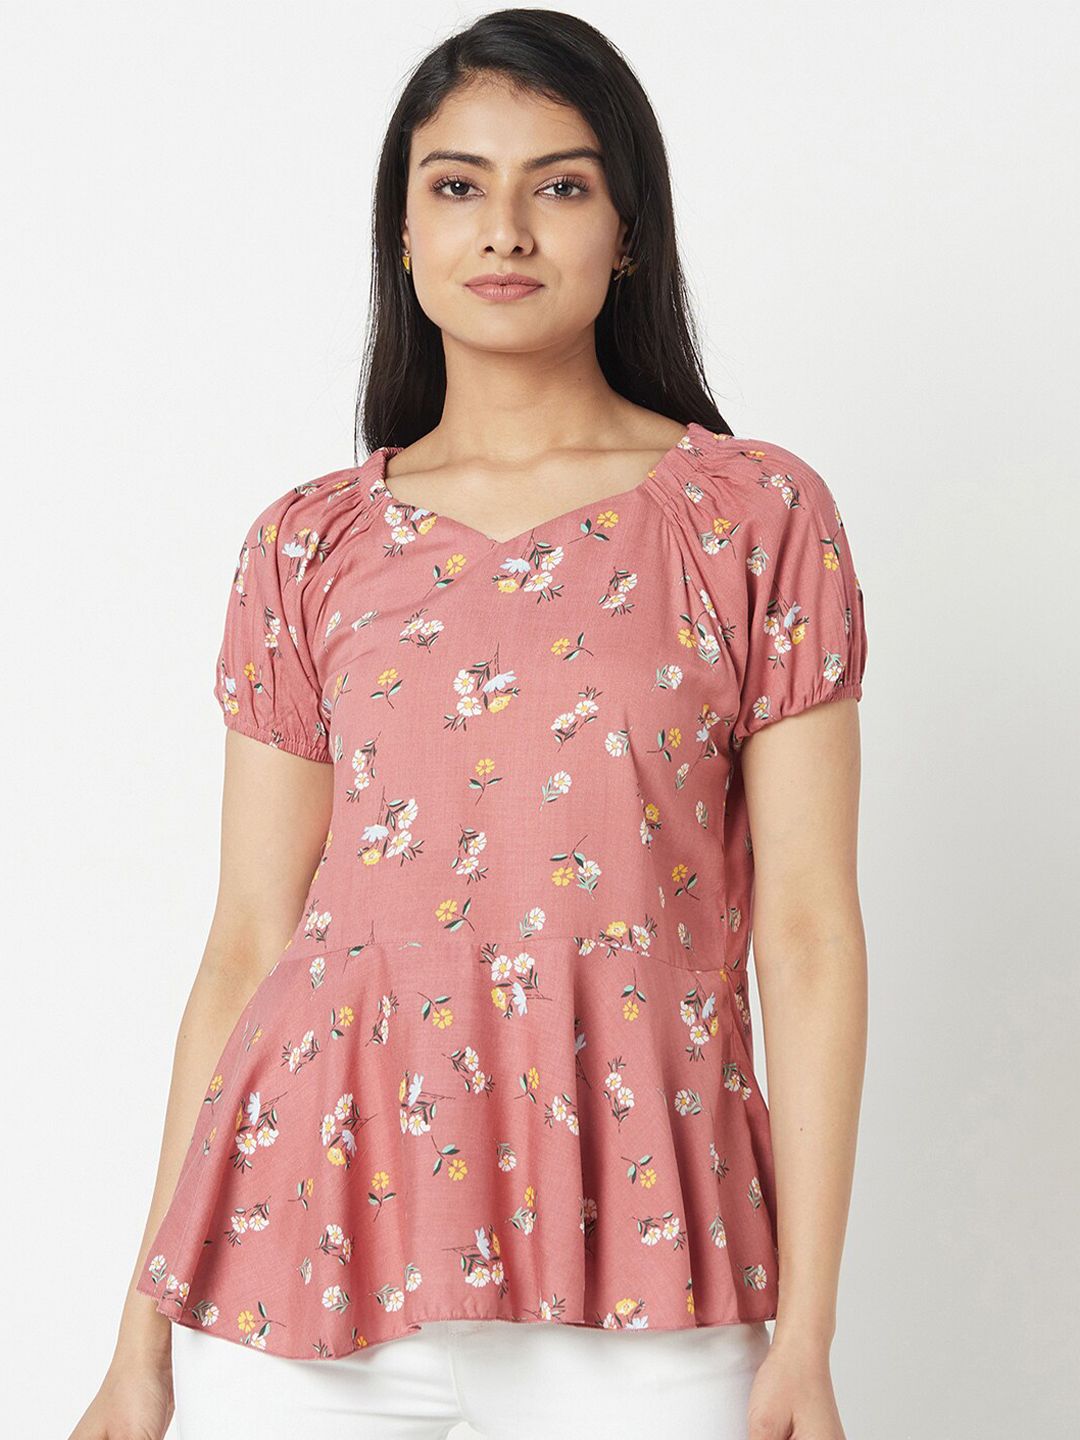 Miss Grace Floral Printed Peplum Top Price in India